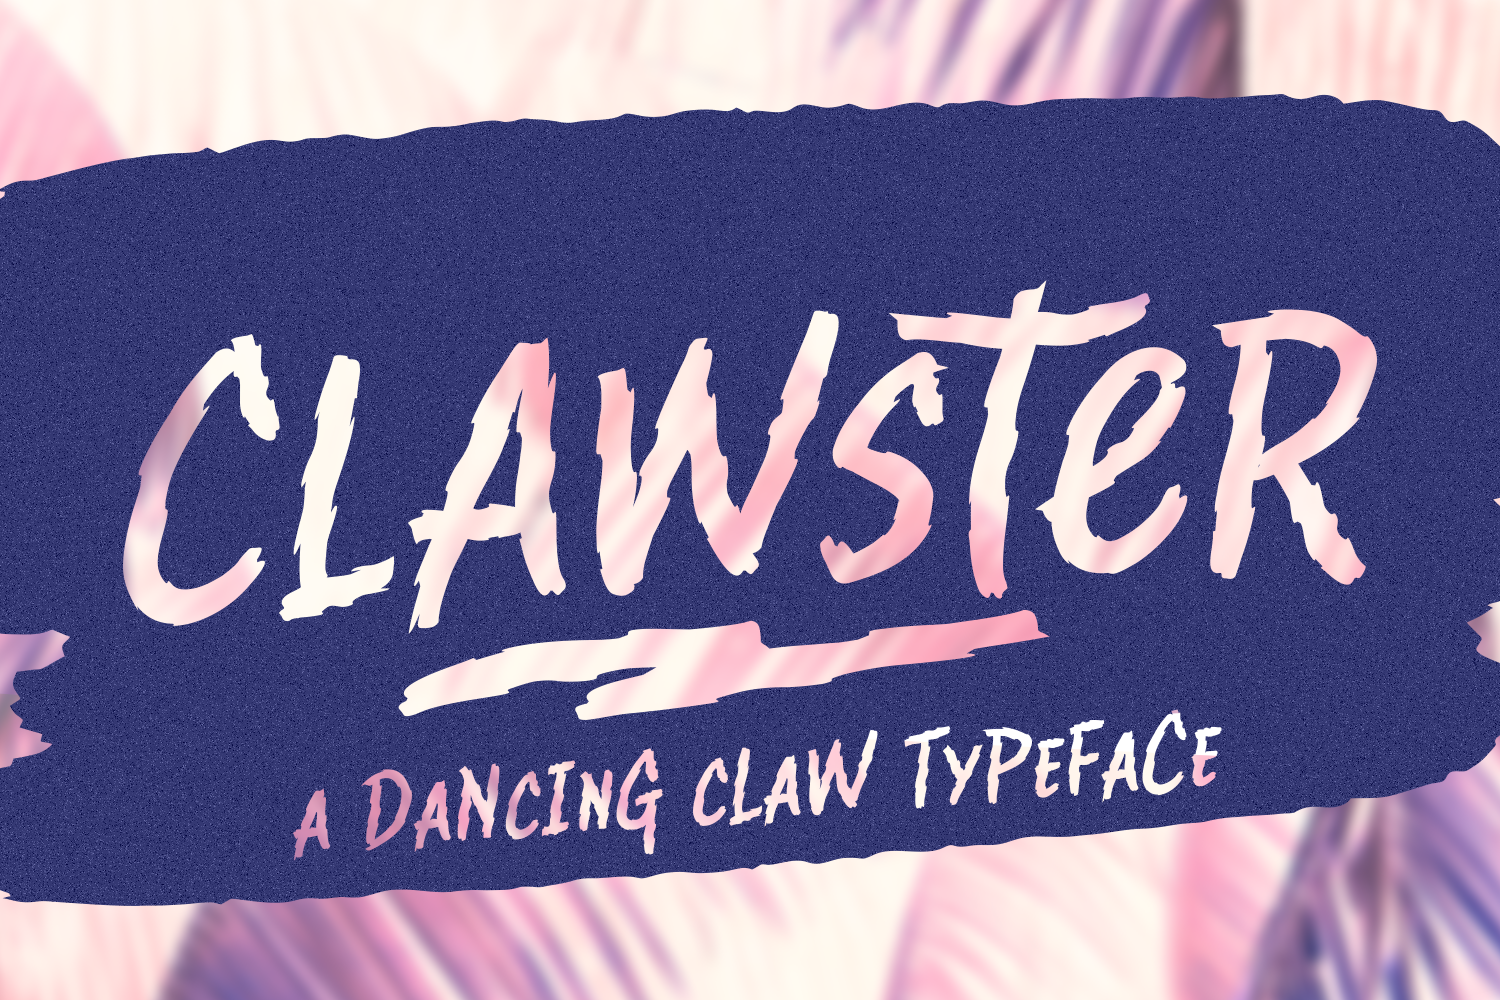 Clawster